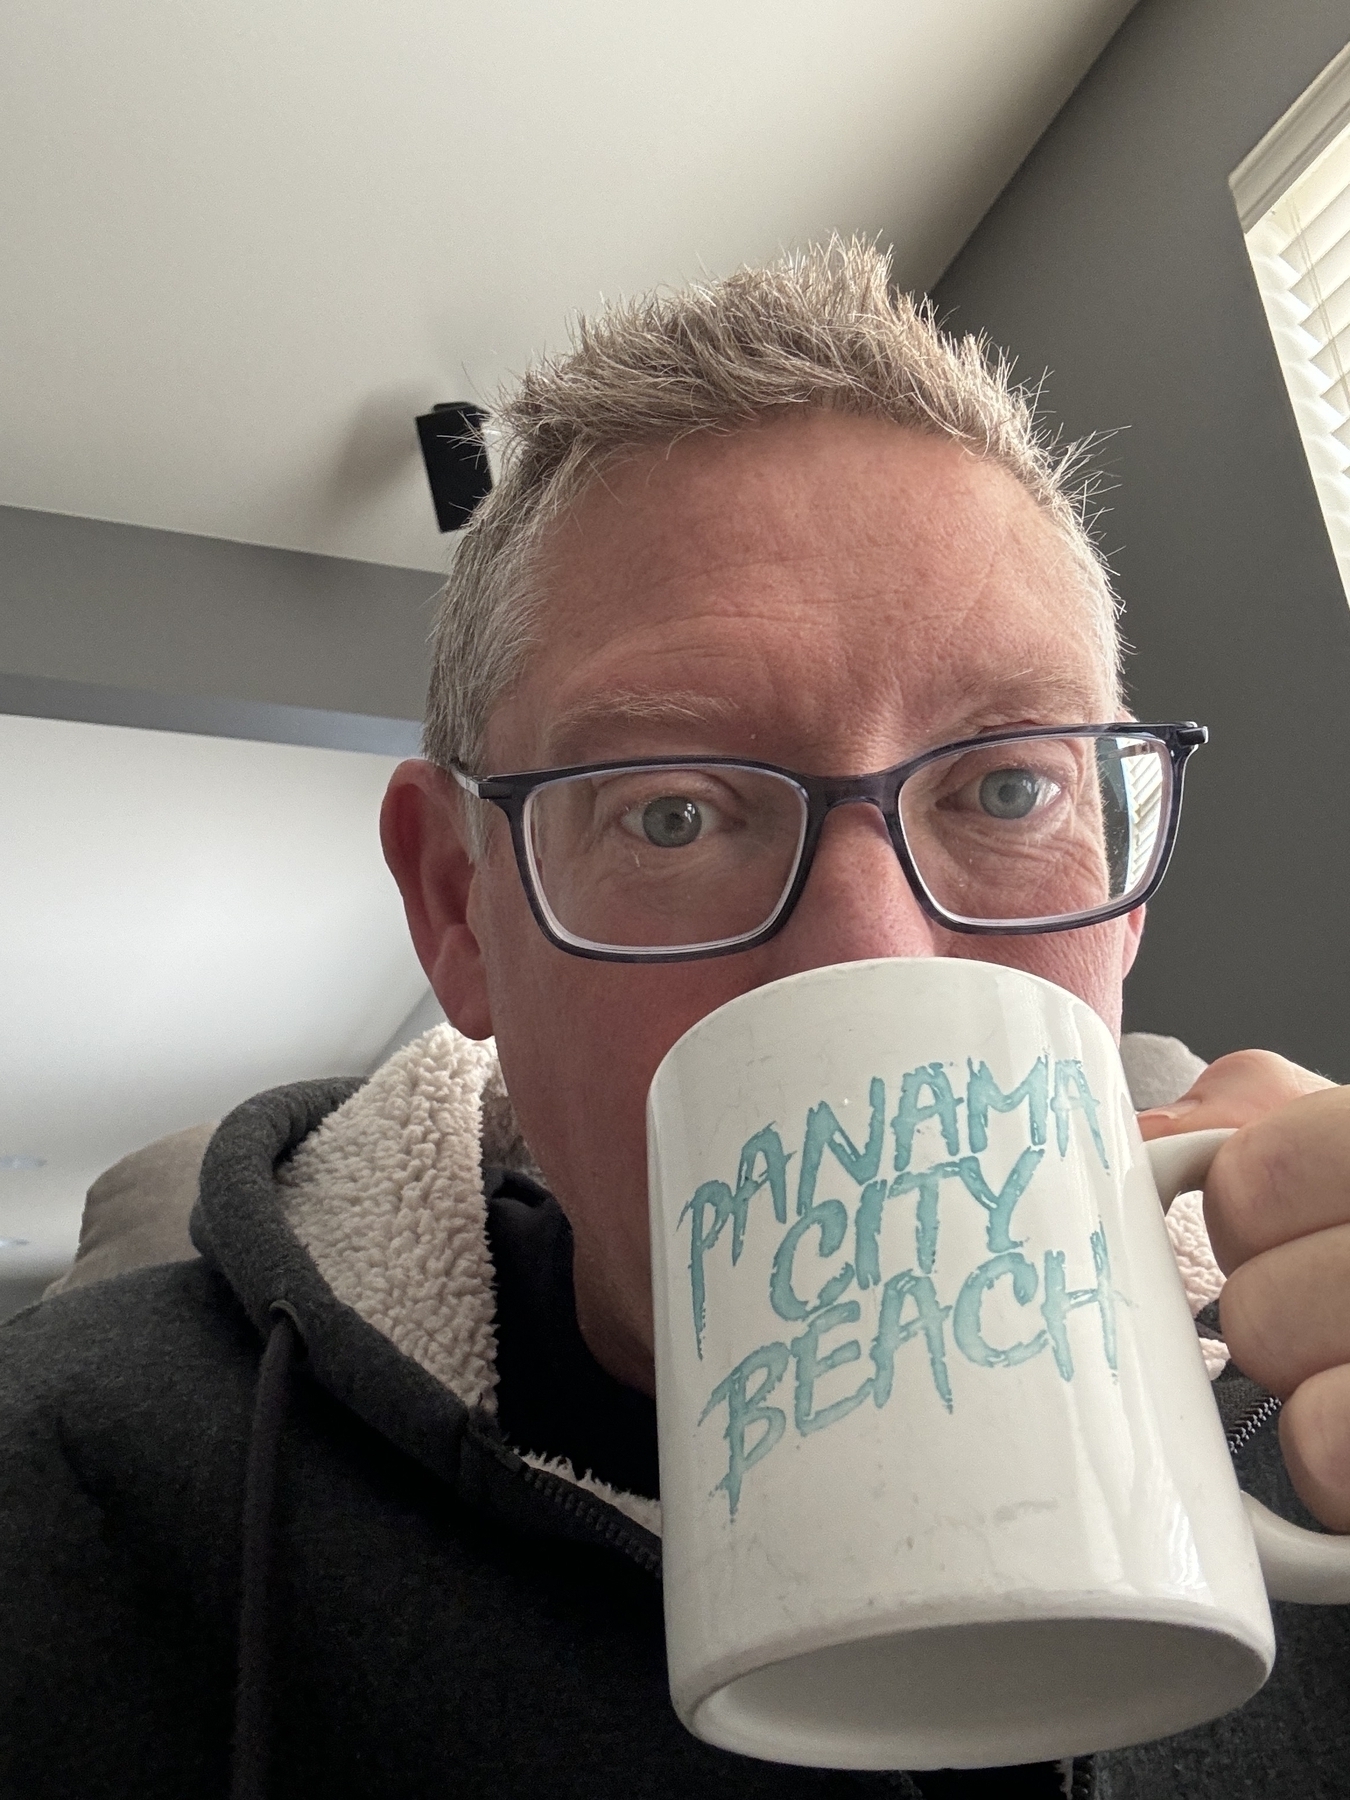 Some guy sipping from a Panama City Beach coffee mug. 